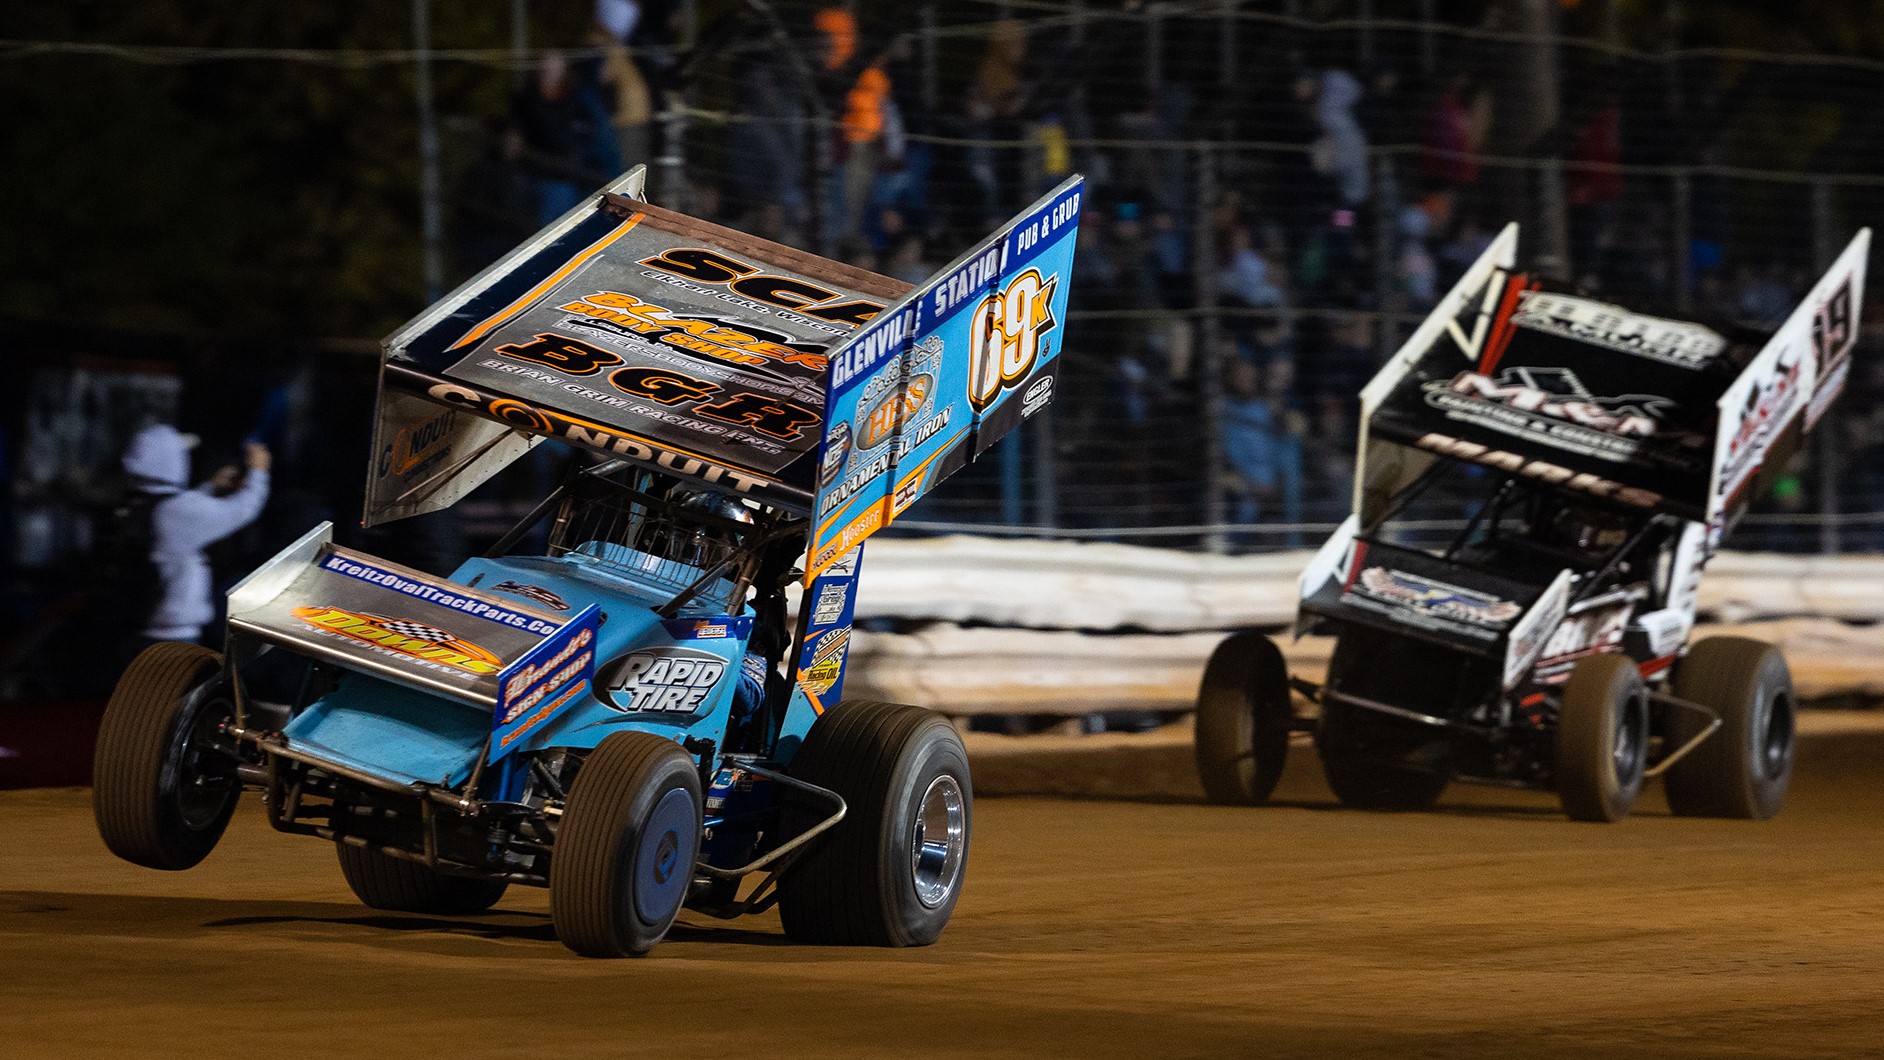 57-year-old Lance Dewease held off two of the fastest rising PA Posse stars and a slew of full-time World of Outlaws NOS Energy Drink Sprint Car Series drivers to win his fifth-career National Open